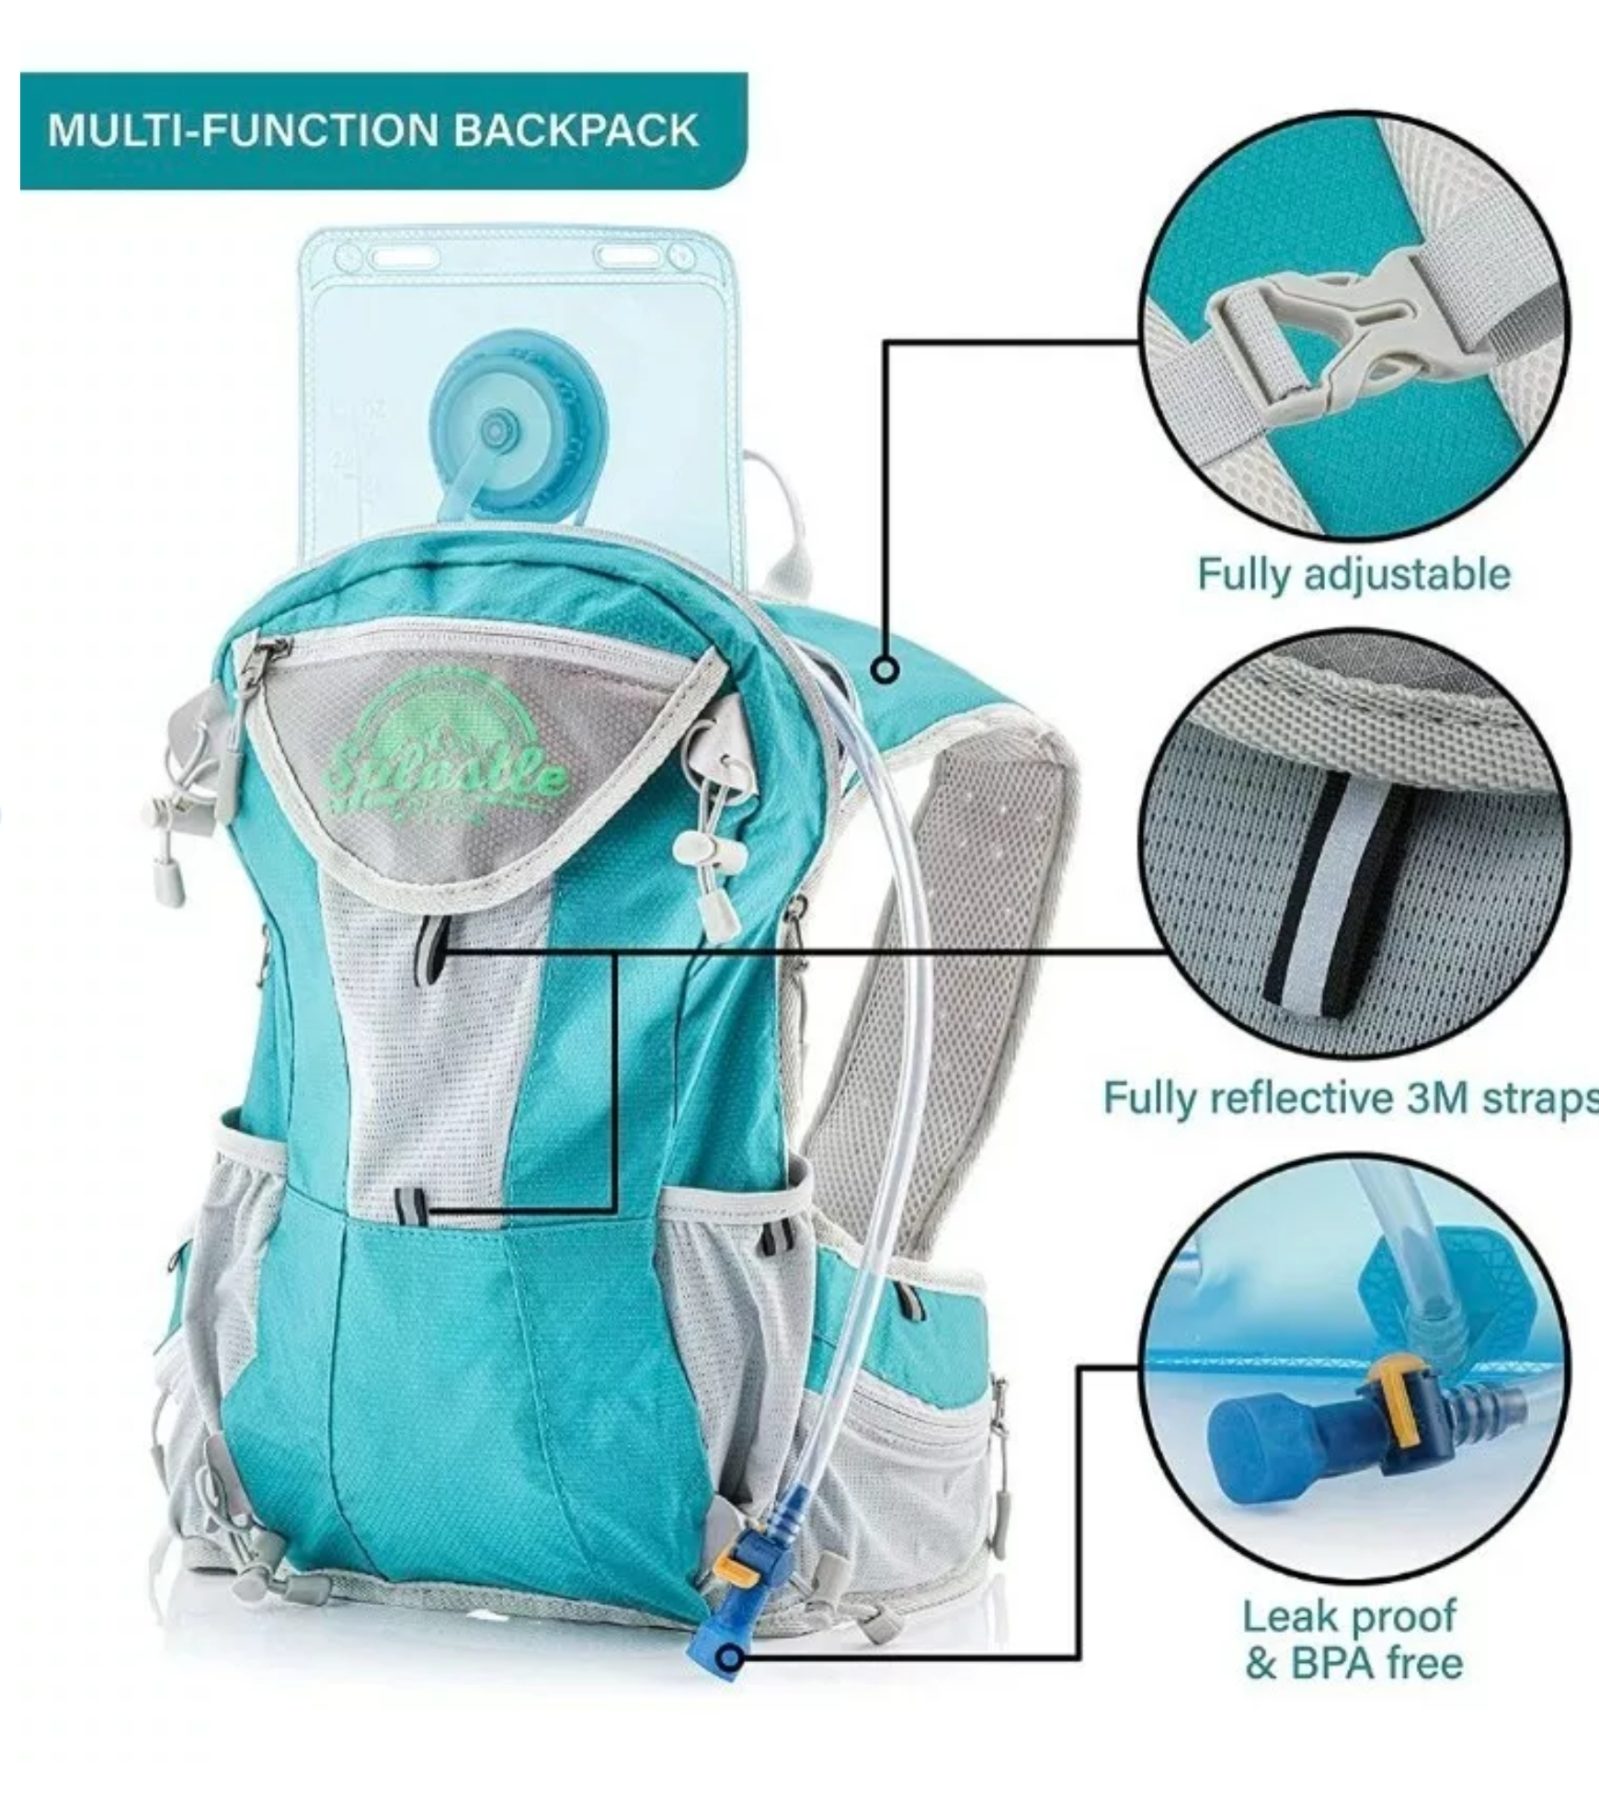 2L High-quality, Lightweight, Comfortable, Breathable, and Totally Reliable Hydration Backpack by Splastle.